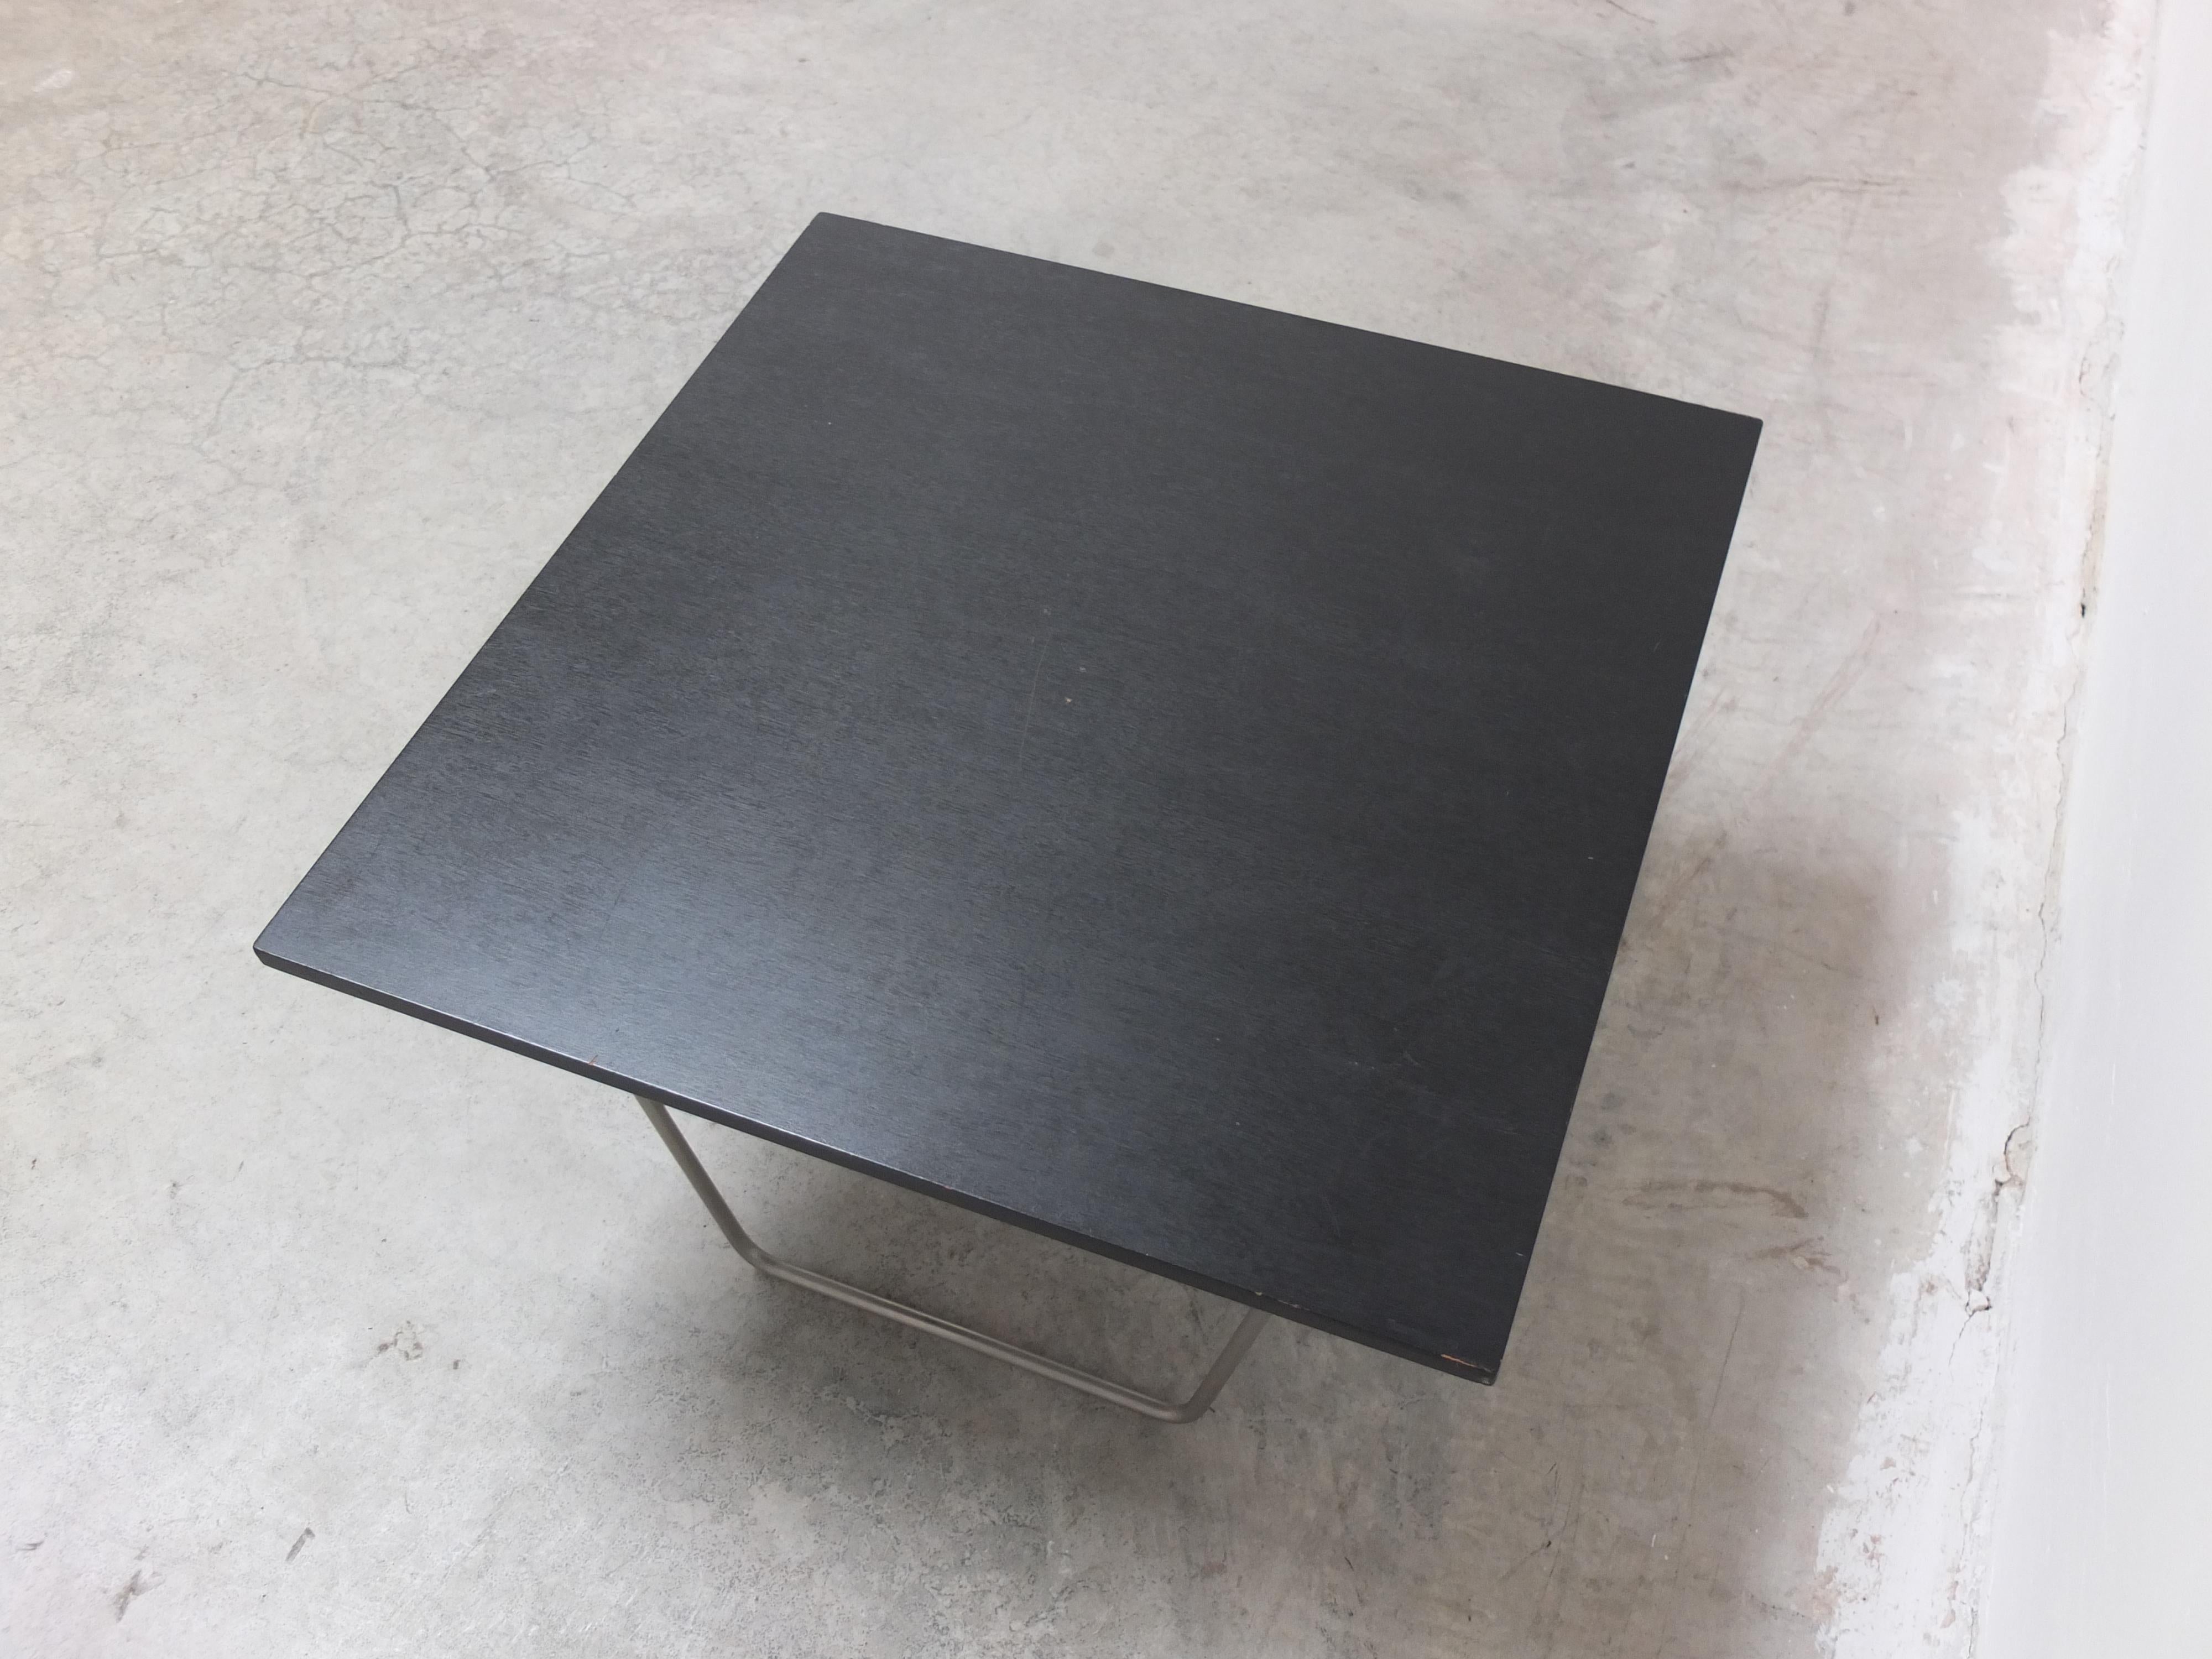 Rare 'Bachelor' Coffee Table by Verner Panton for Fritz Hansen, 1953 For Sale 1